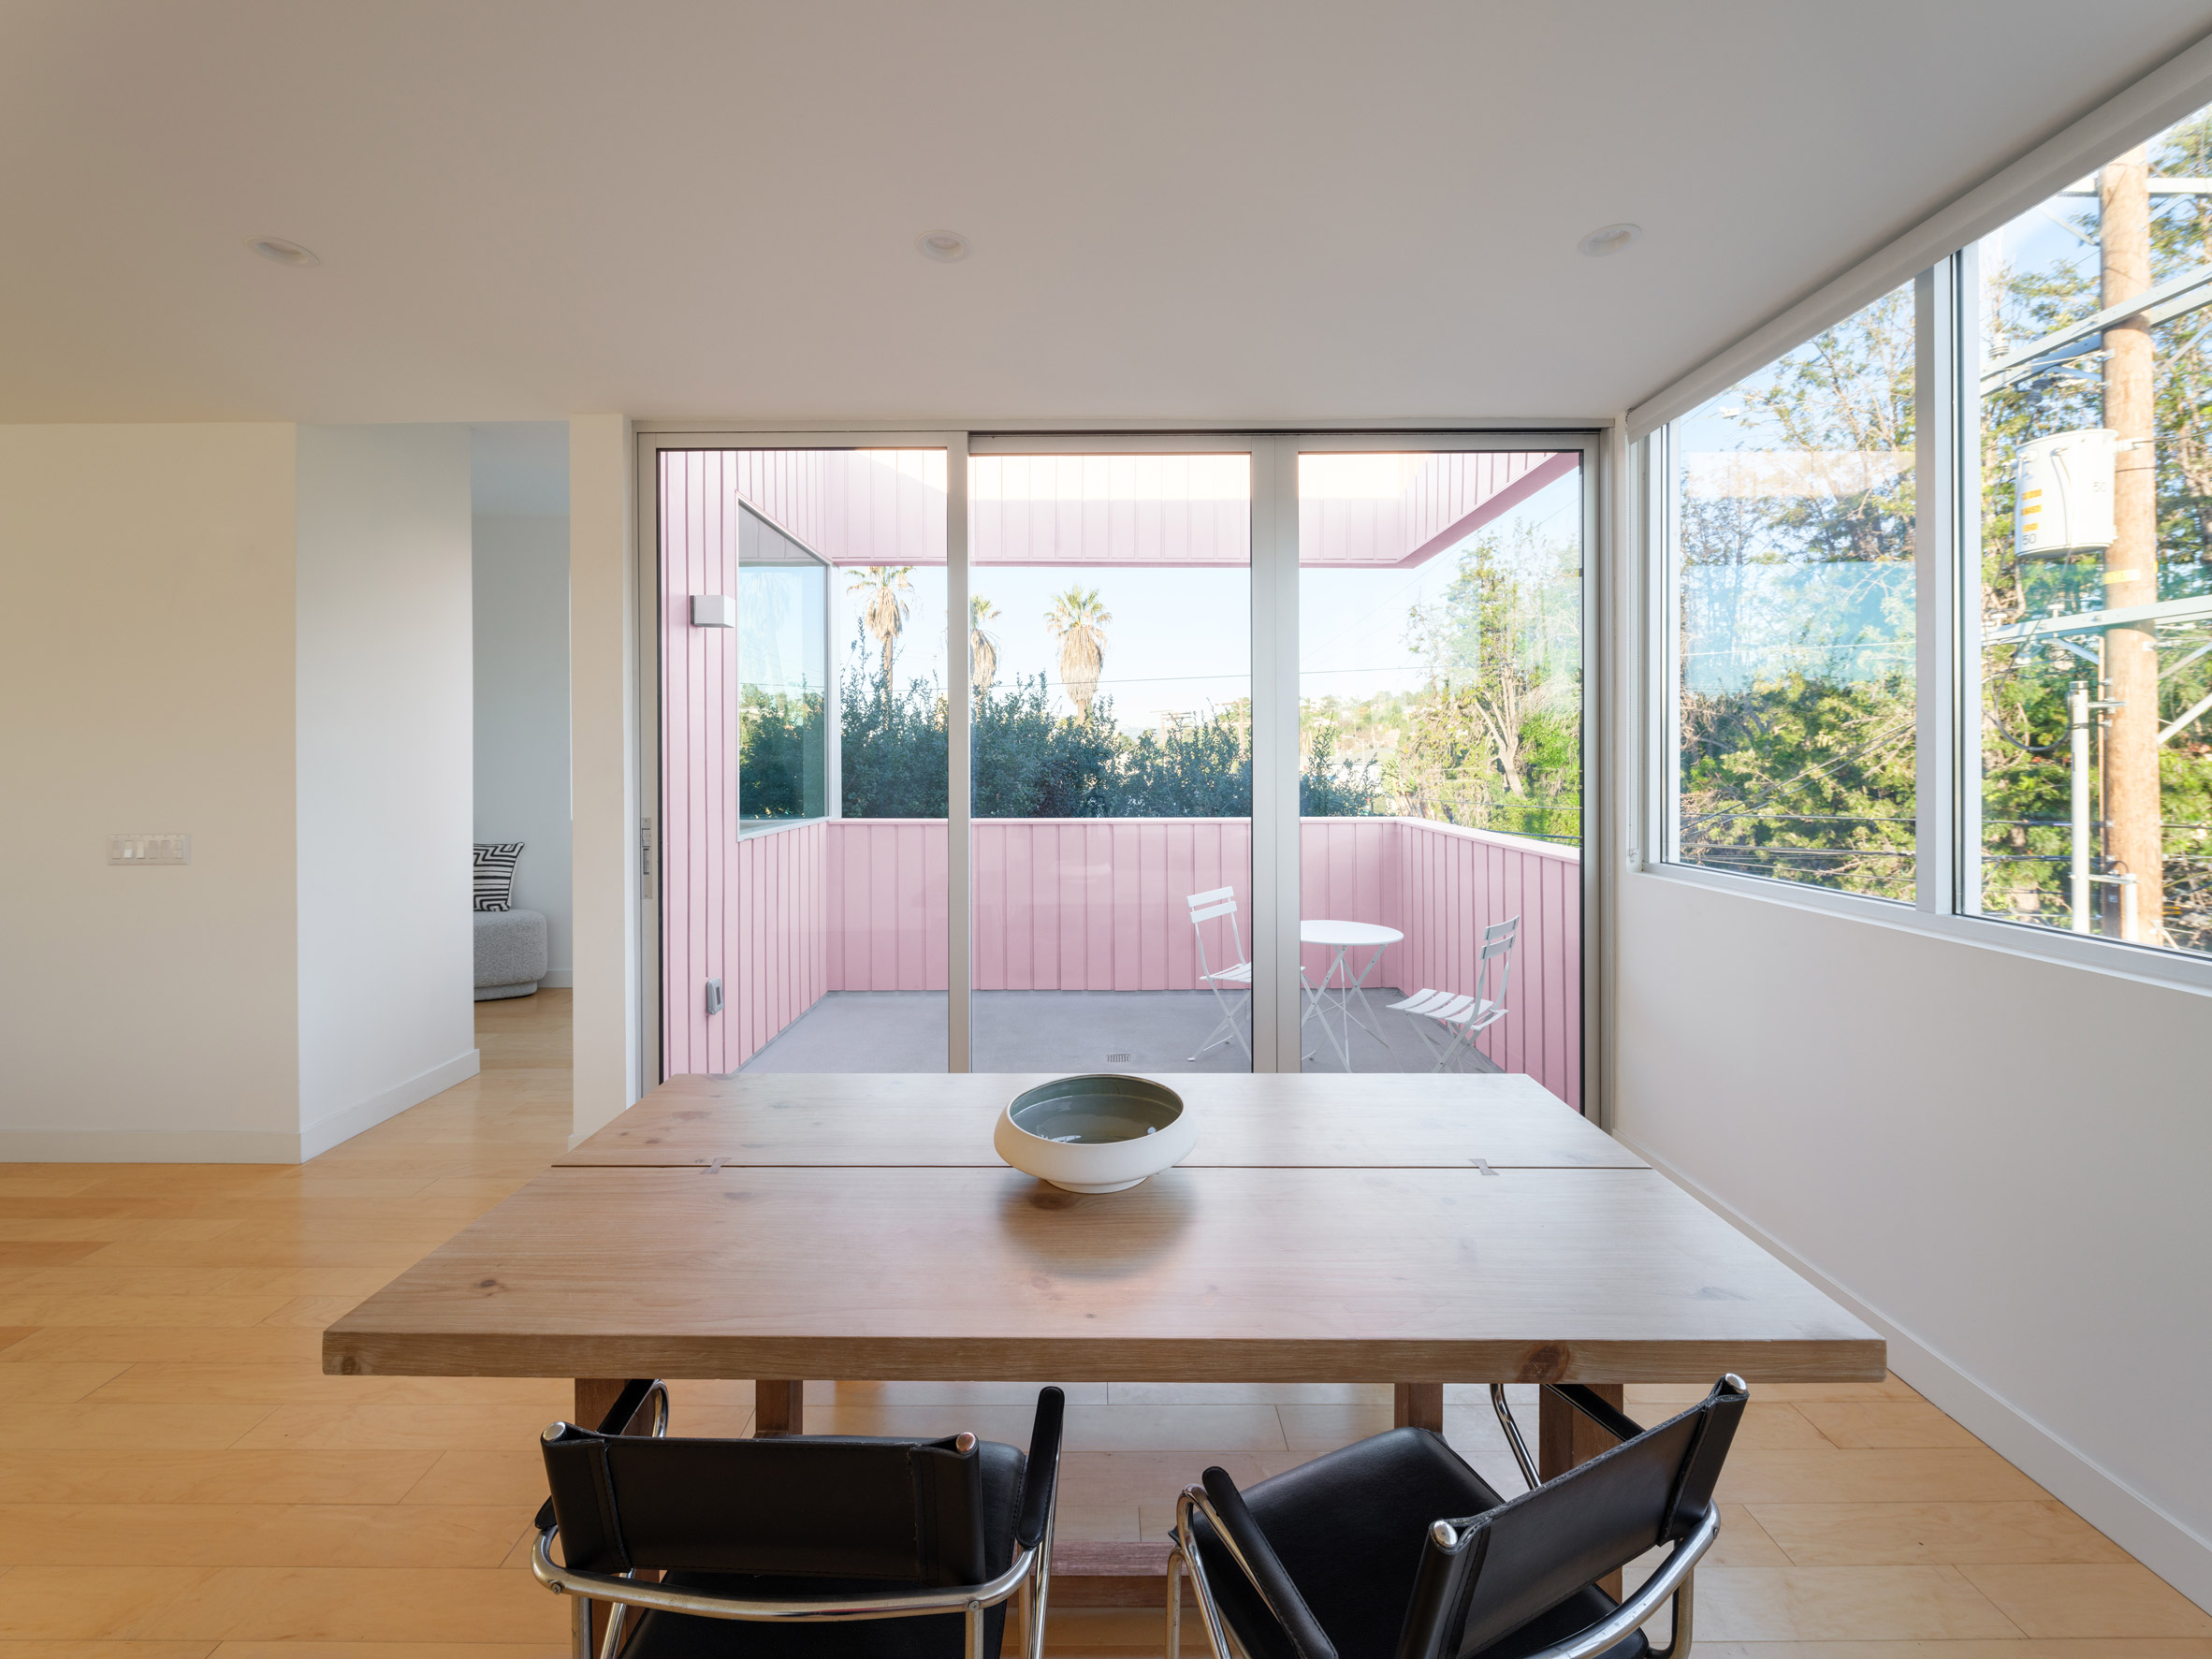 Dining room with wooden floors and sliding glass doors leading to a terrace with pink walls